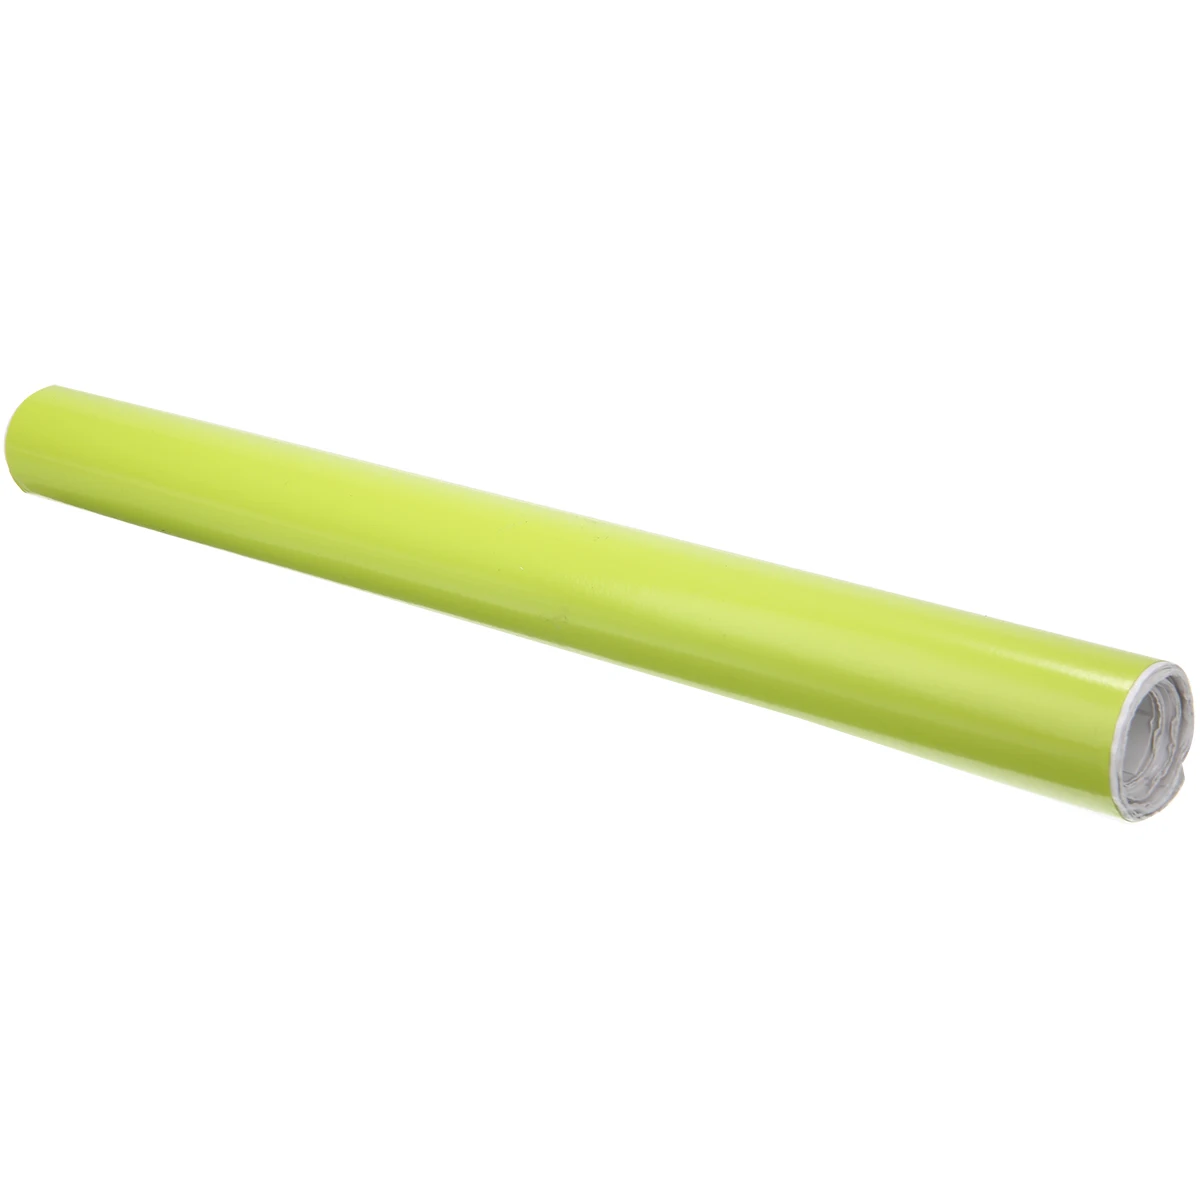 30x152cm Neon Yellow Car Vinyl Foil Film High Quality Wrap Roll Sticker Decal For Vehicle Decoration